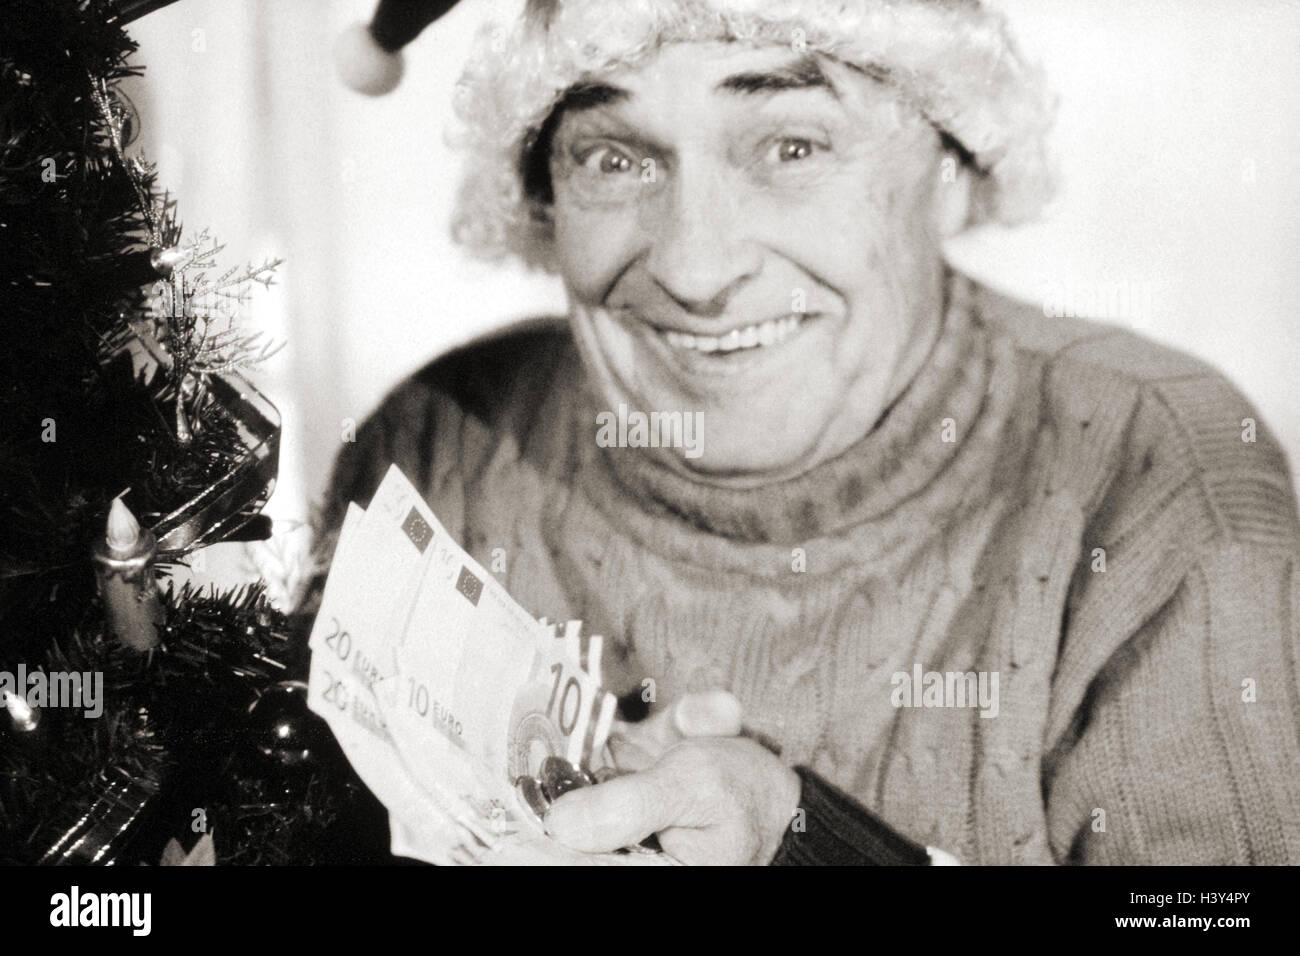 Christmas, senior, Santa's hat, hand, euro, bank notes, coins, b/w, inside, Christmas tree, Christmas tree, for Christmas, man, old, gesture, joy, happy, Europe, currency, single currency, banknotes, euronotes, money, gift money, present Stock Photo